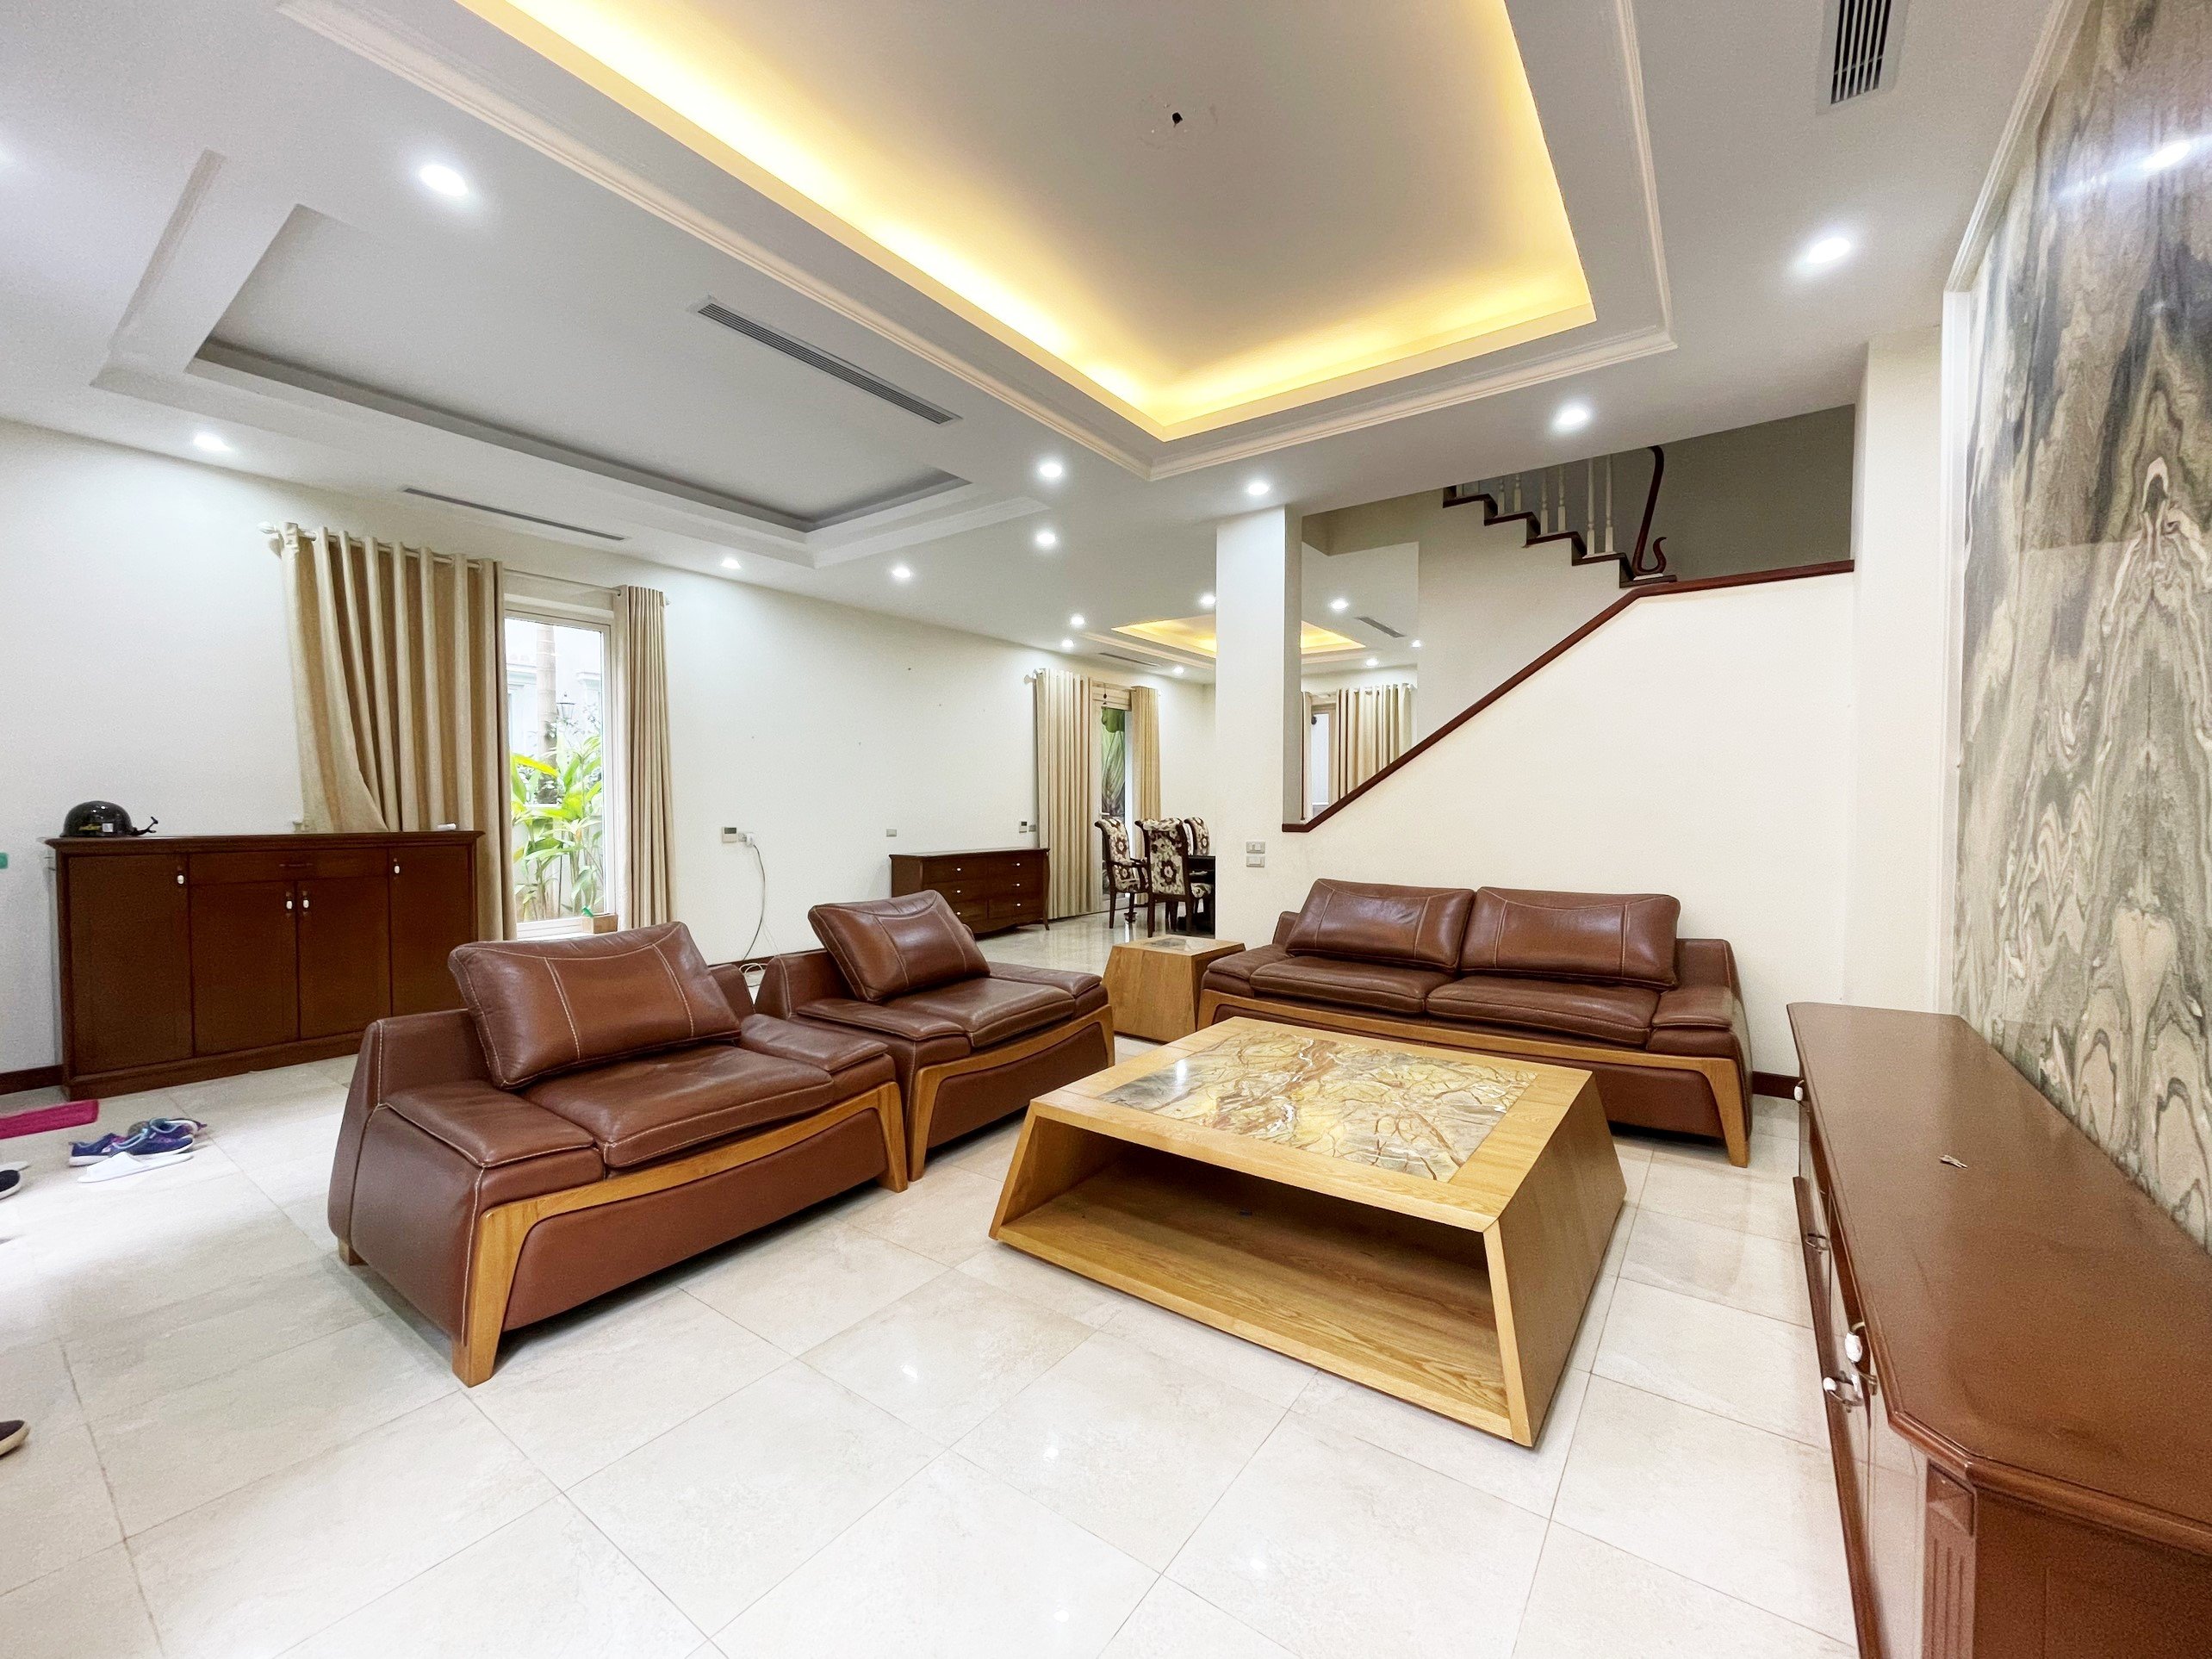 Lovely 3BRs villa for rent on Anh Dao, Vinhomes Riverside urban town